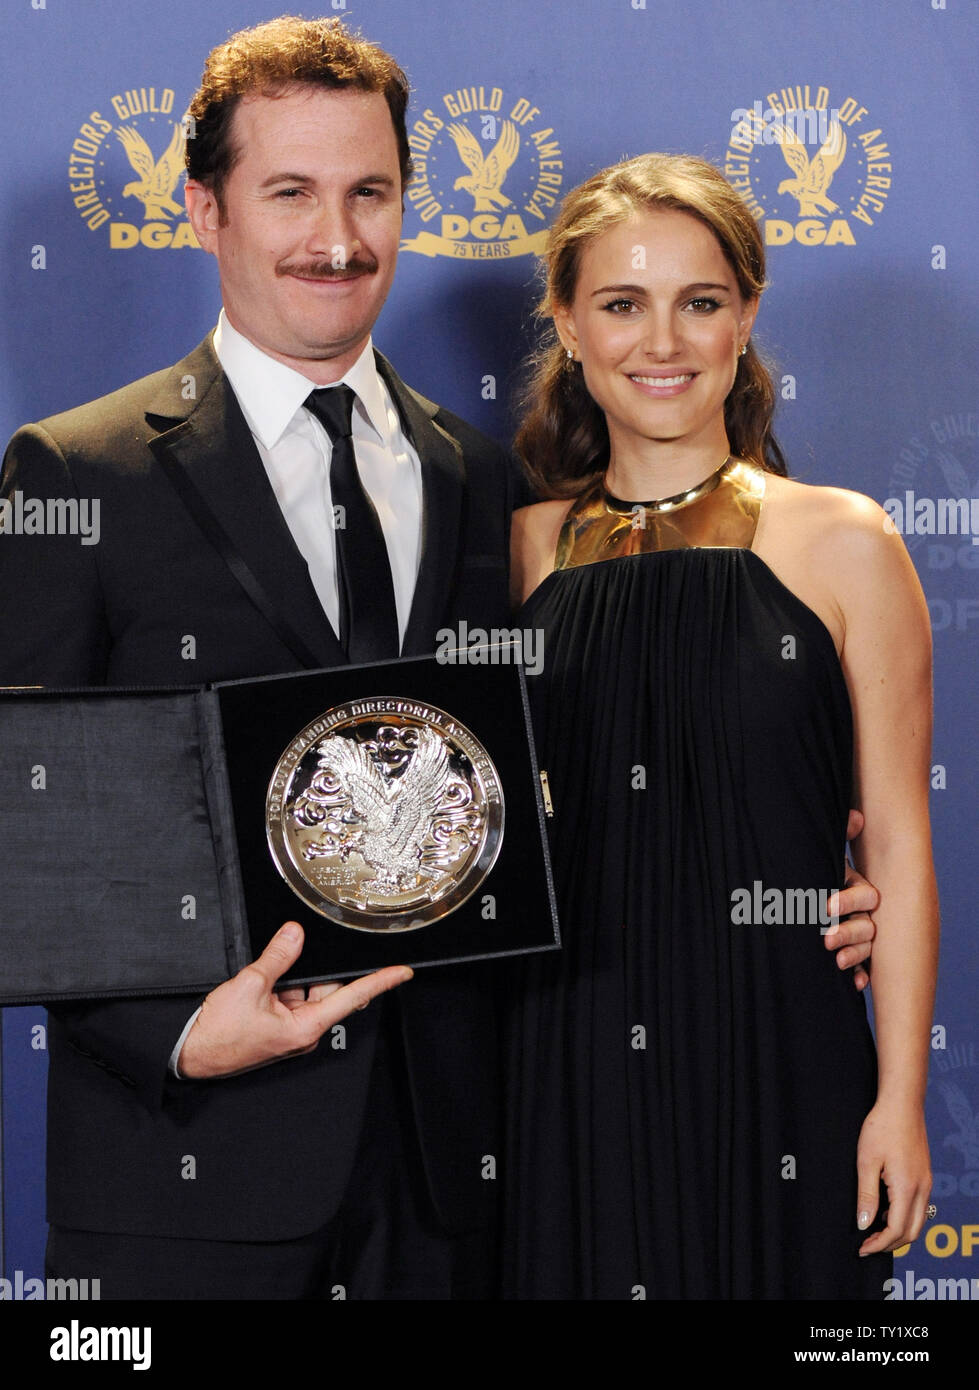 Aronofsky (L), director and feature film award nominee for "Black Swan", appears backstage with cast member Natalie Portman at the 63rd annual Directors Guild of America Awards (DGA) in Los Angeles